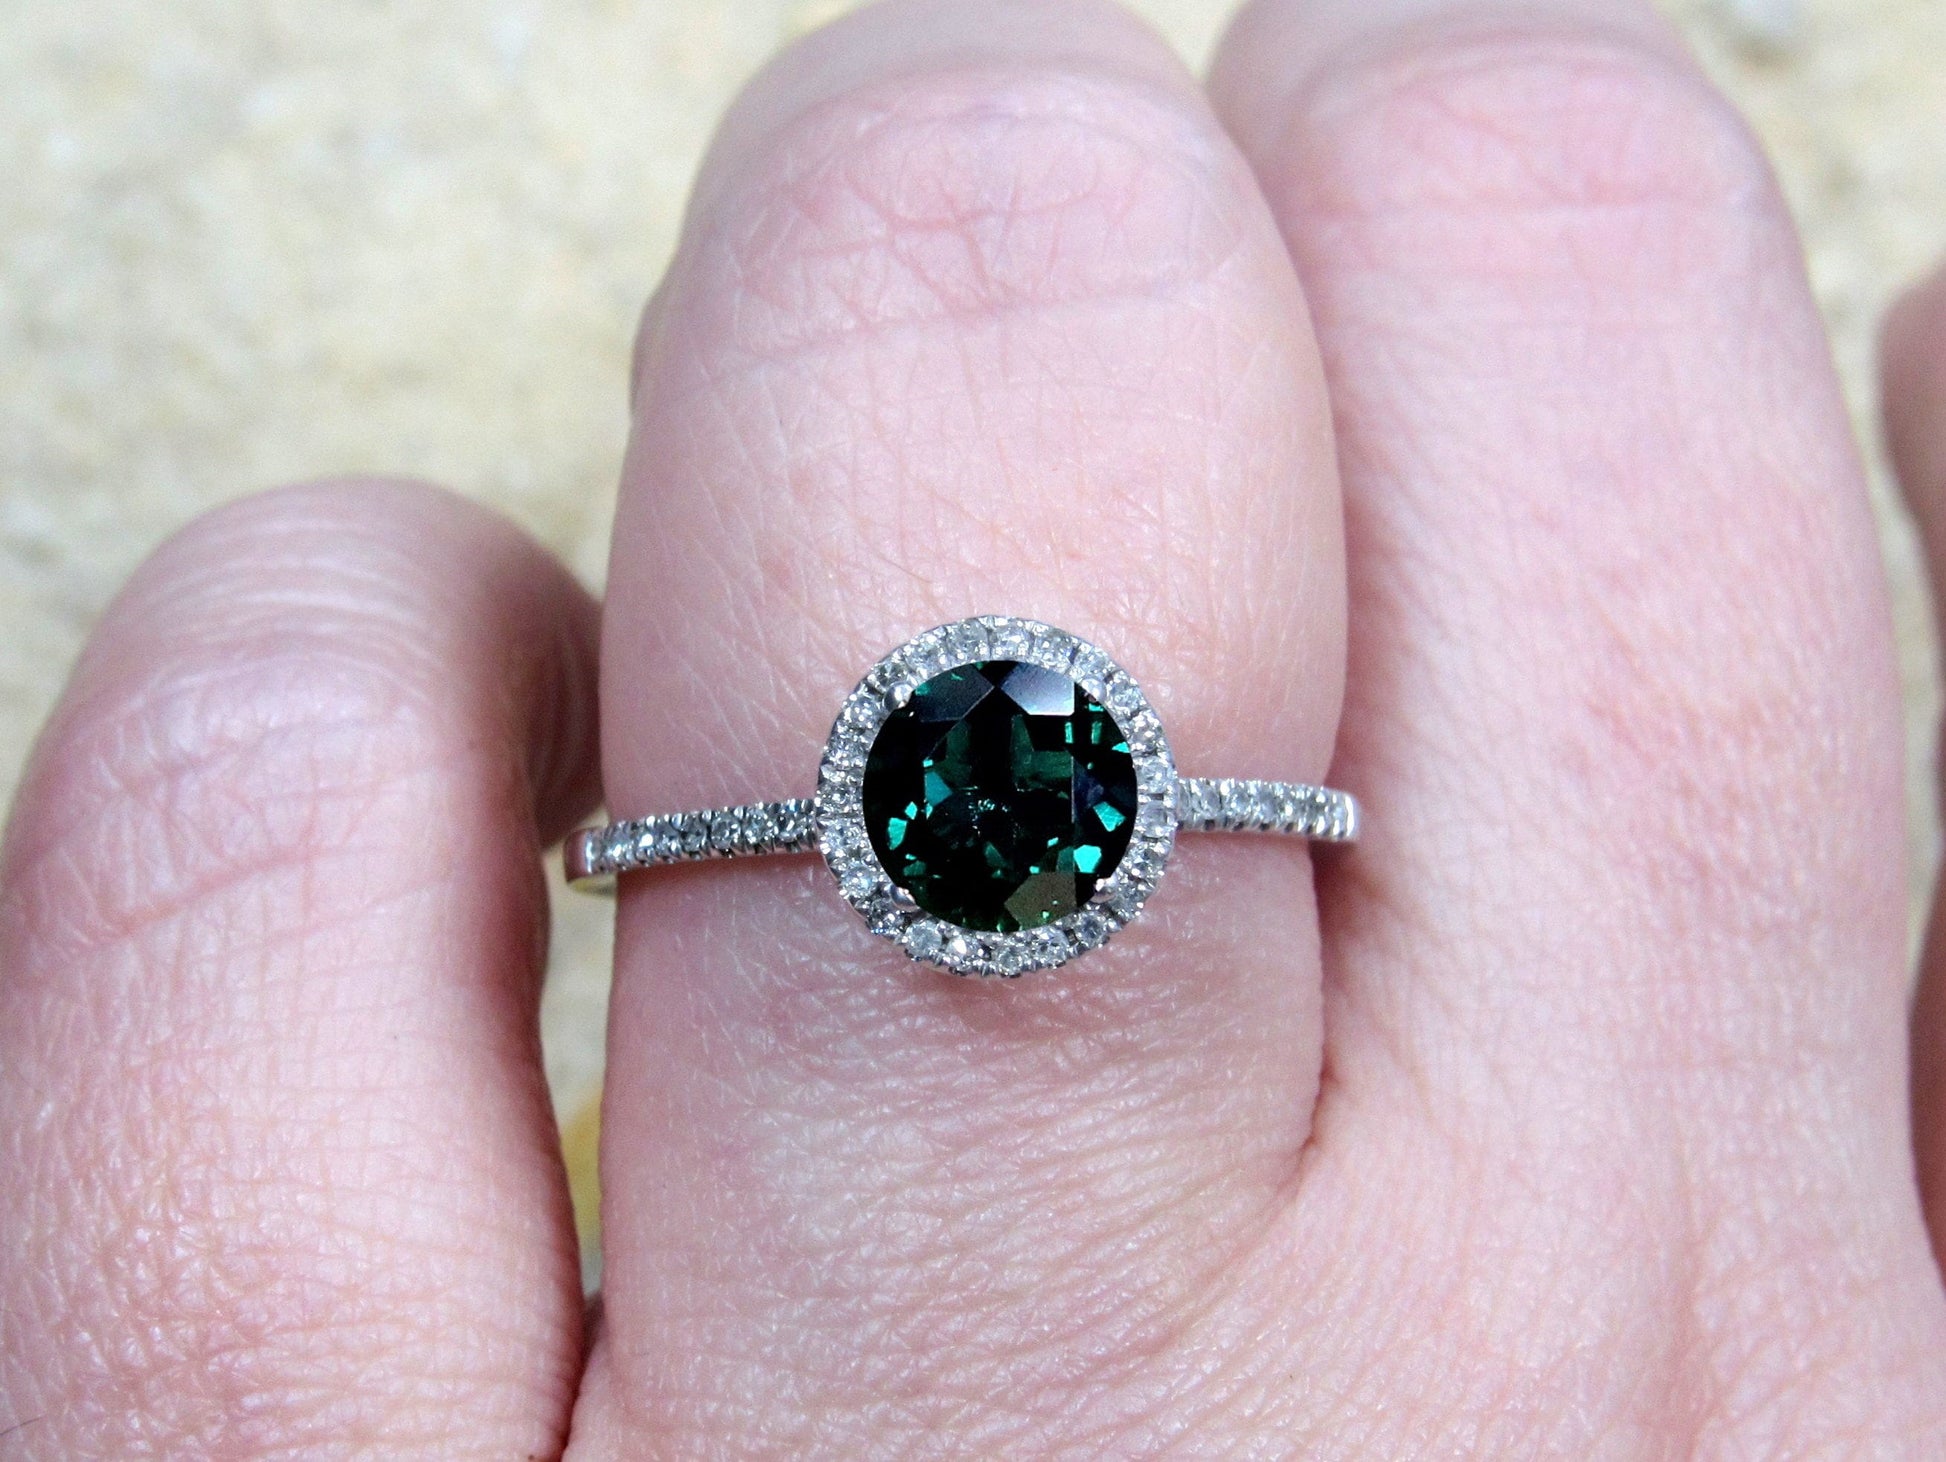 Green Emerald Engagement Ring,Emerald Ring,Emerald Engagement Ring,Diamond Halo Ring,Pricus,Petite,1ct Ring,White-Yellow-Rose Gold 6mm BellaMoreDesign.com